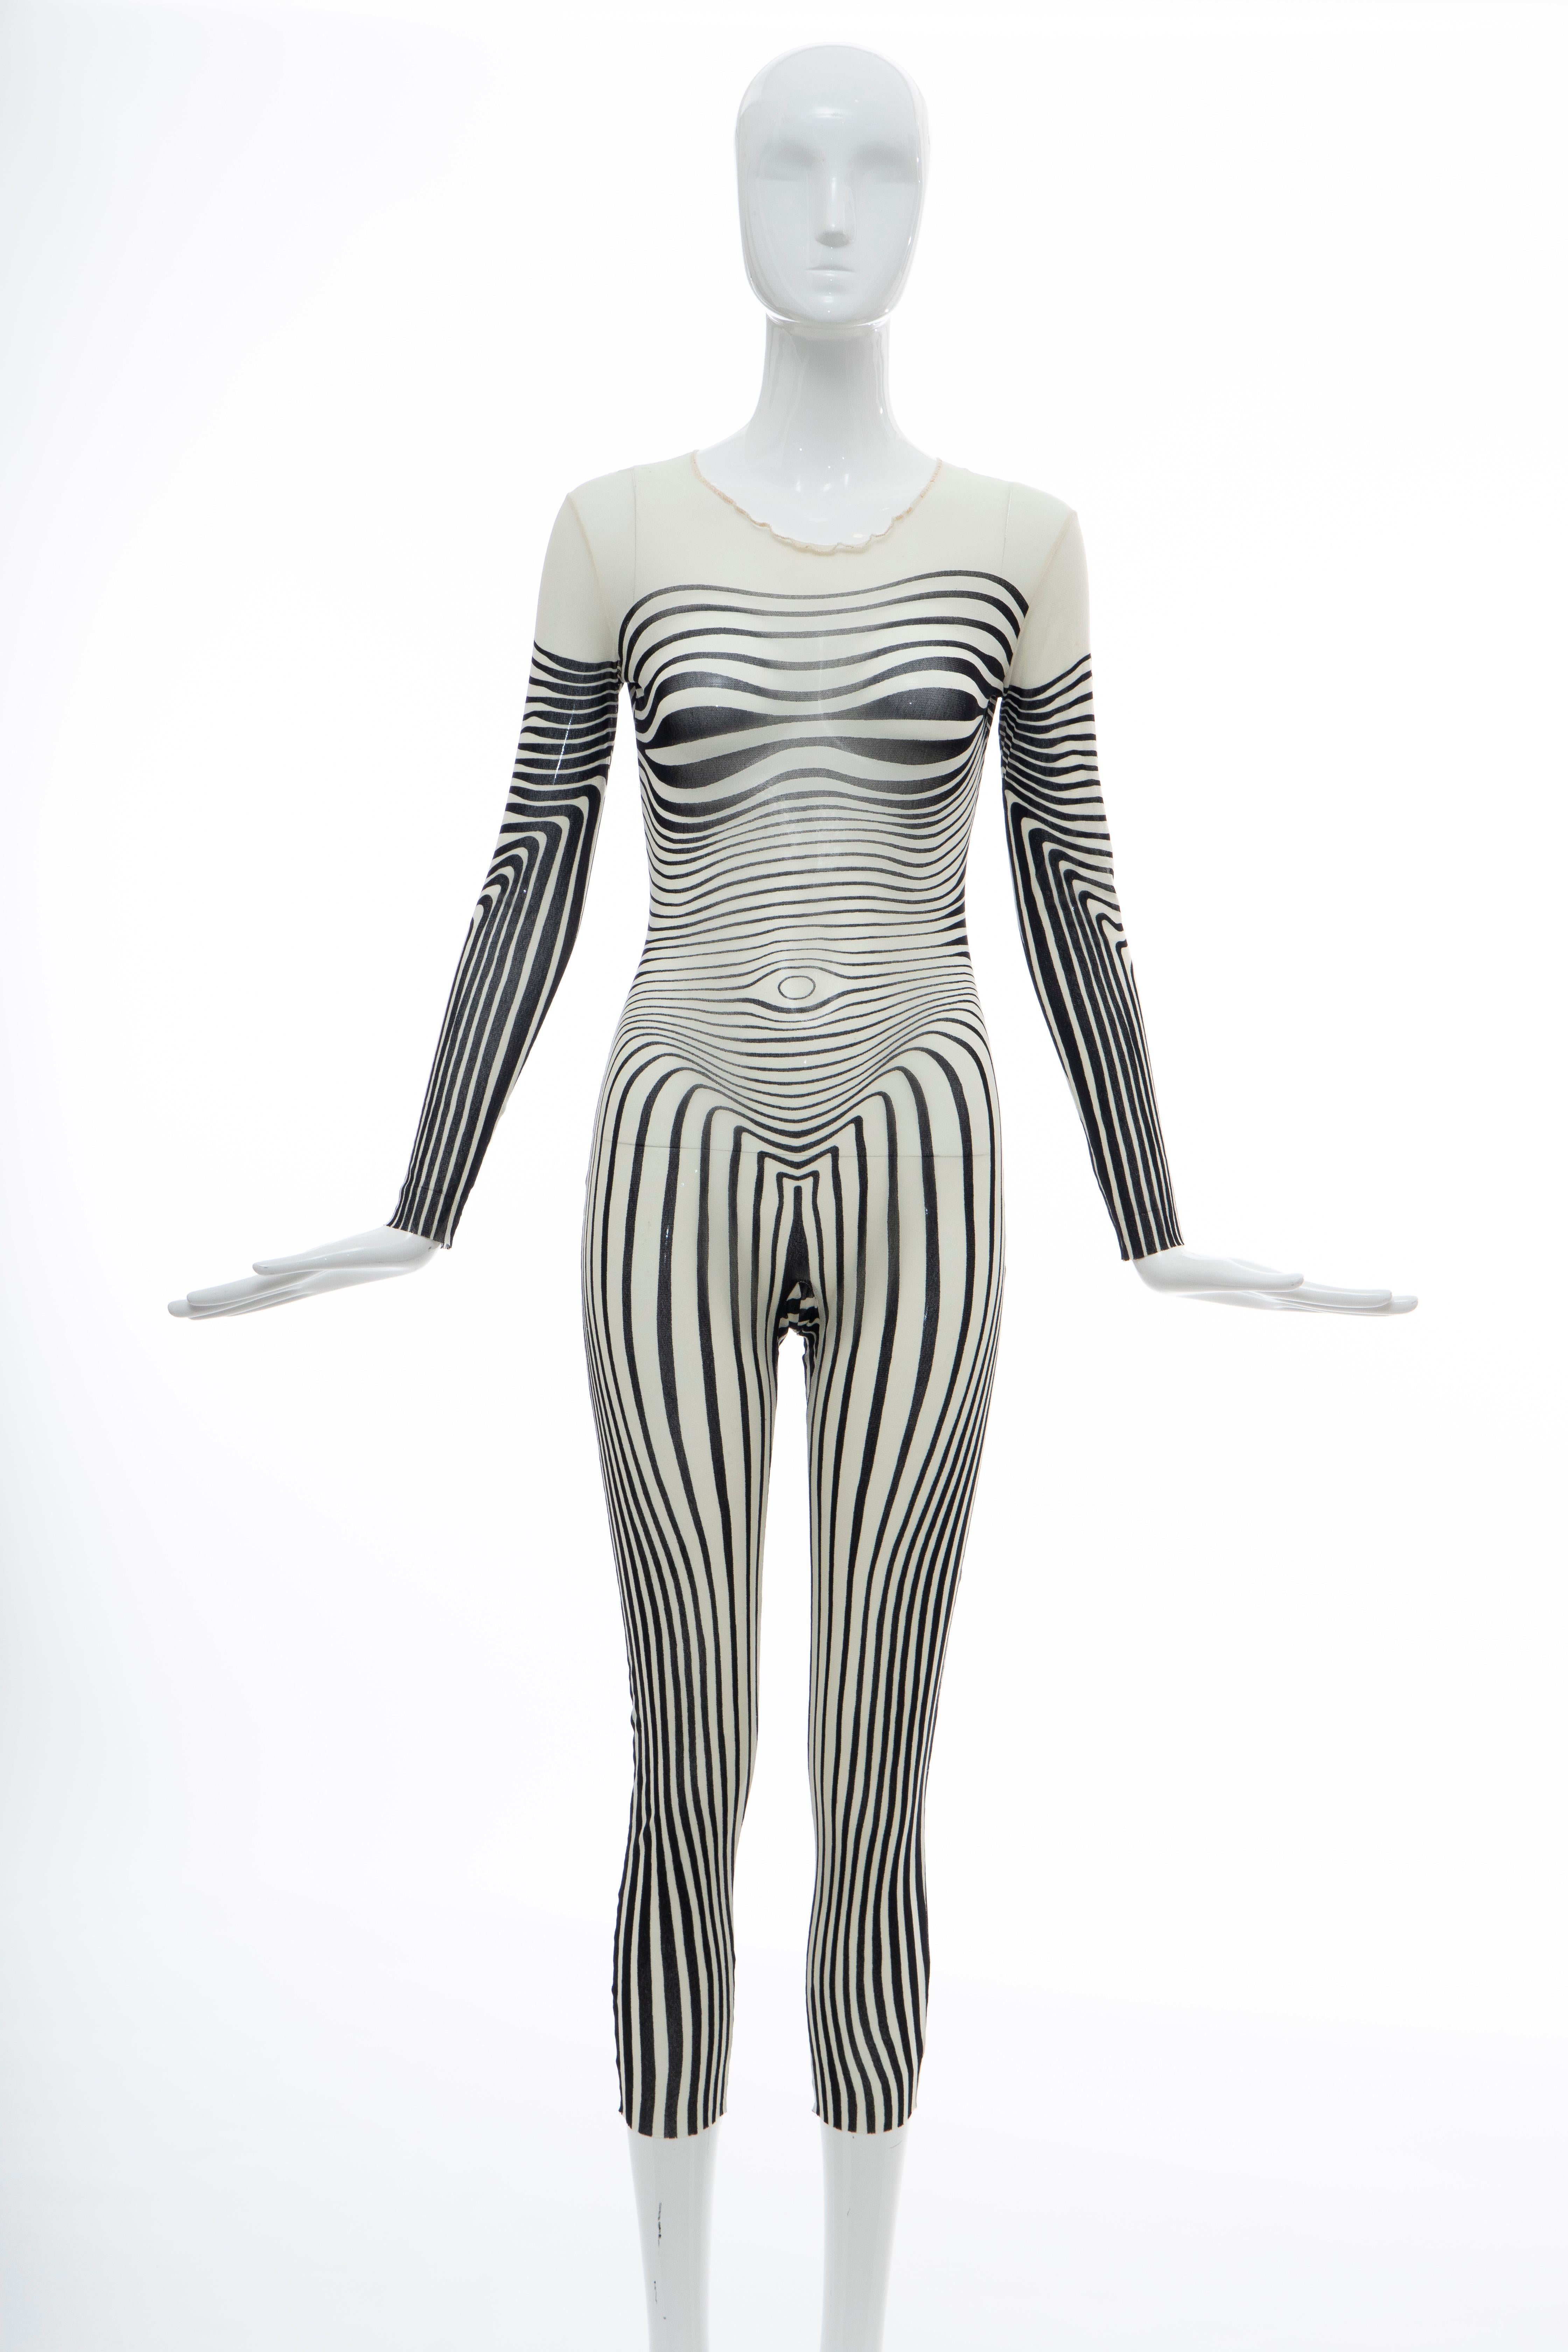 Jean Paul Gaultier, Spring - Summer 1996 stretch-jersey bodysuit printed with body contours, back zip and Maille labelled.

Medium

Bust: 32, Waist: 27, Hips: 32, Sleeve: 22, Length: 49